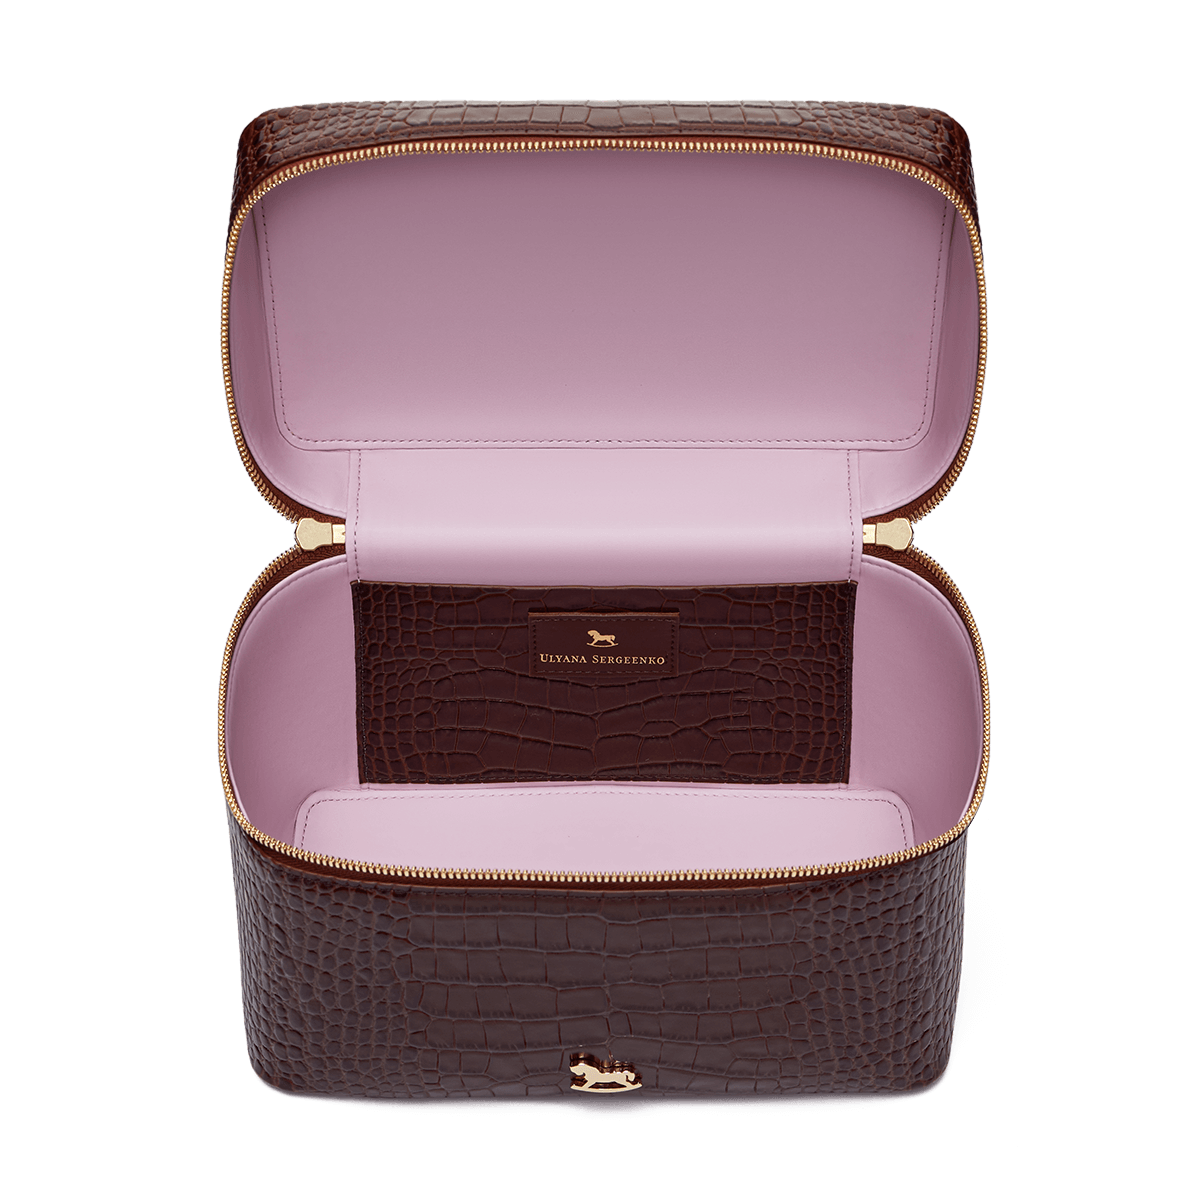 Cosmetic case